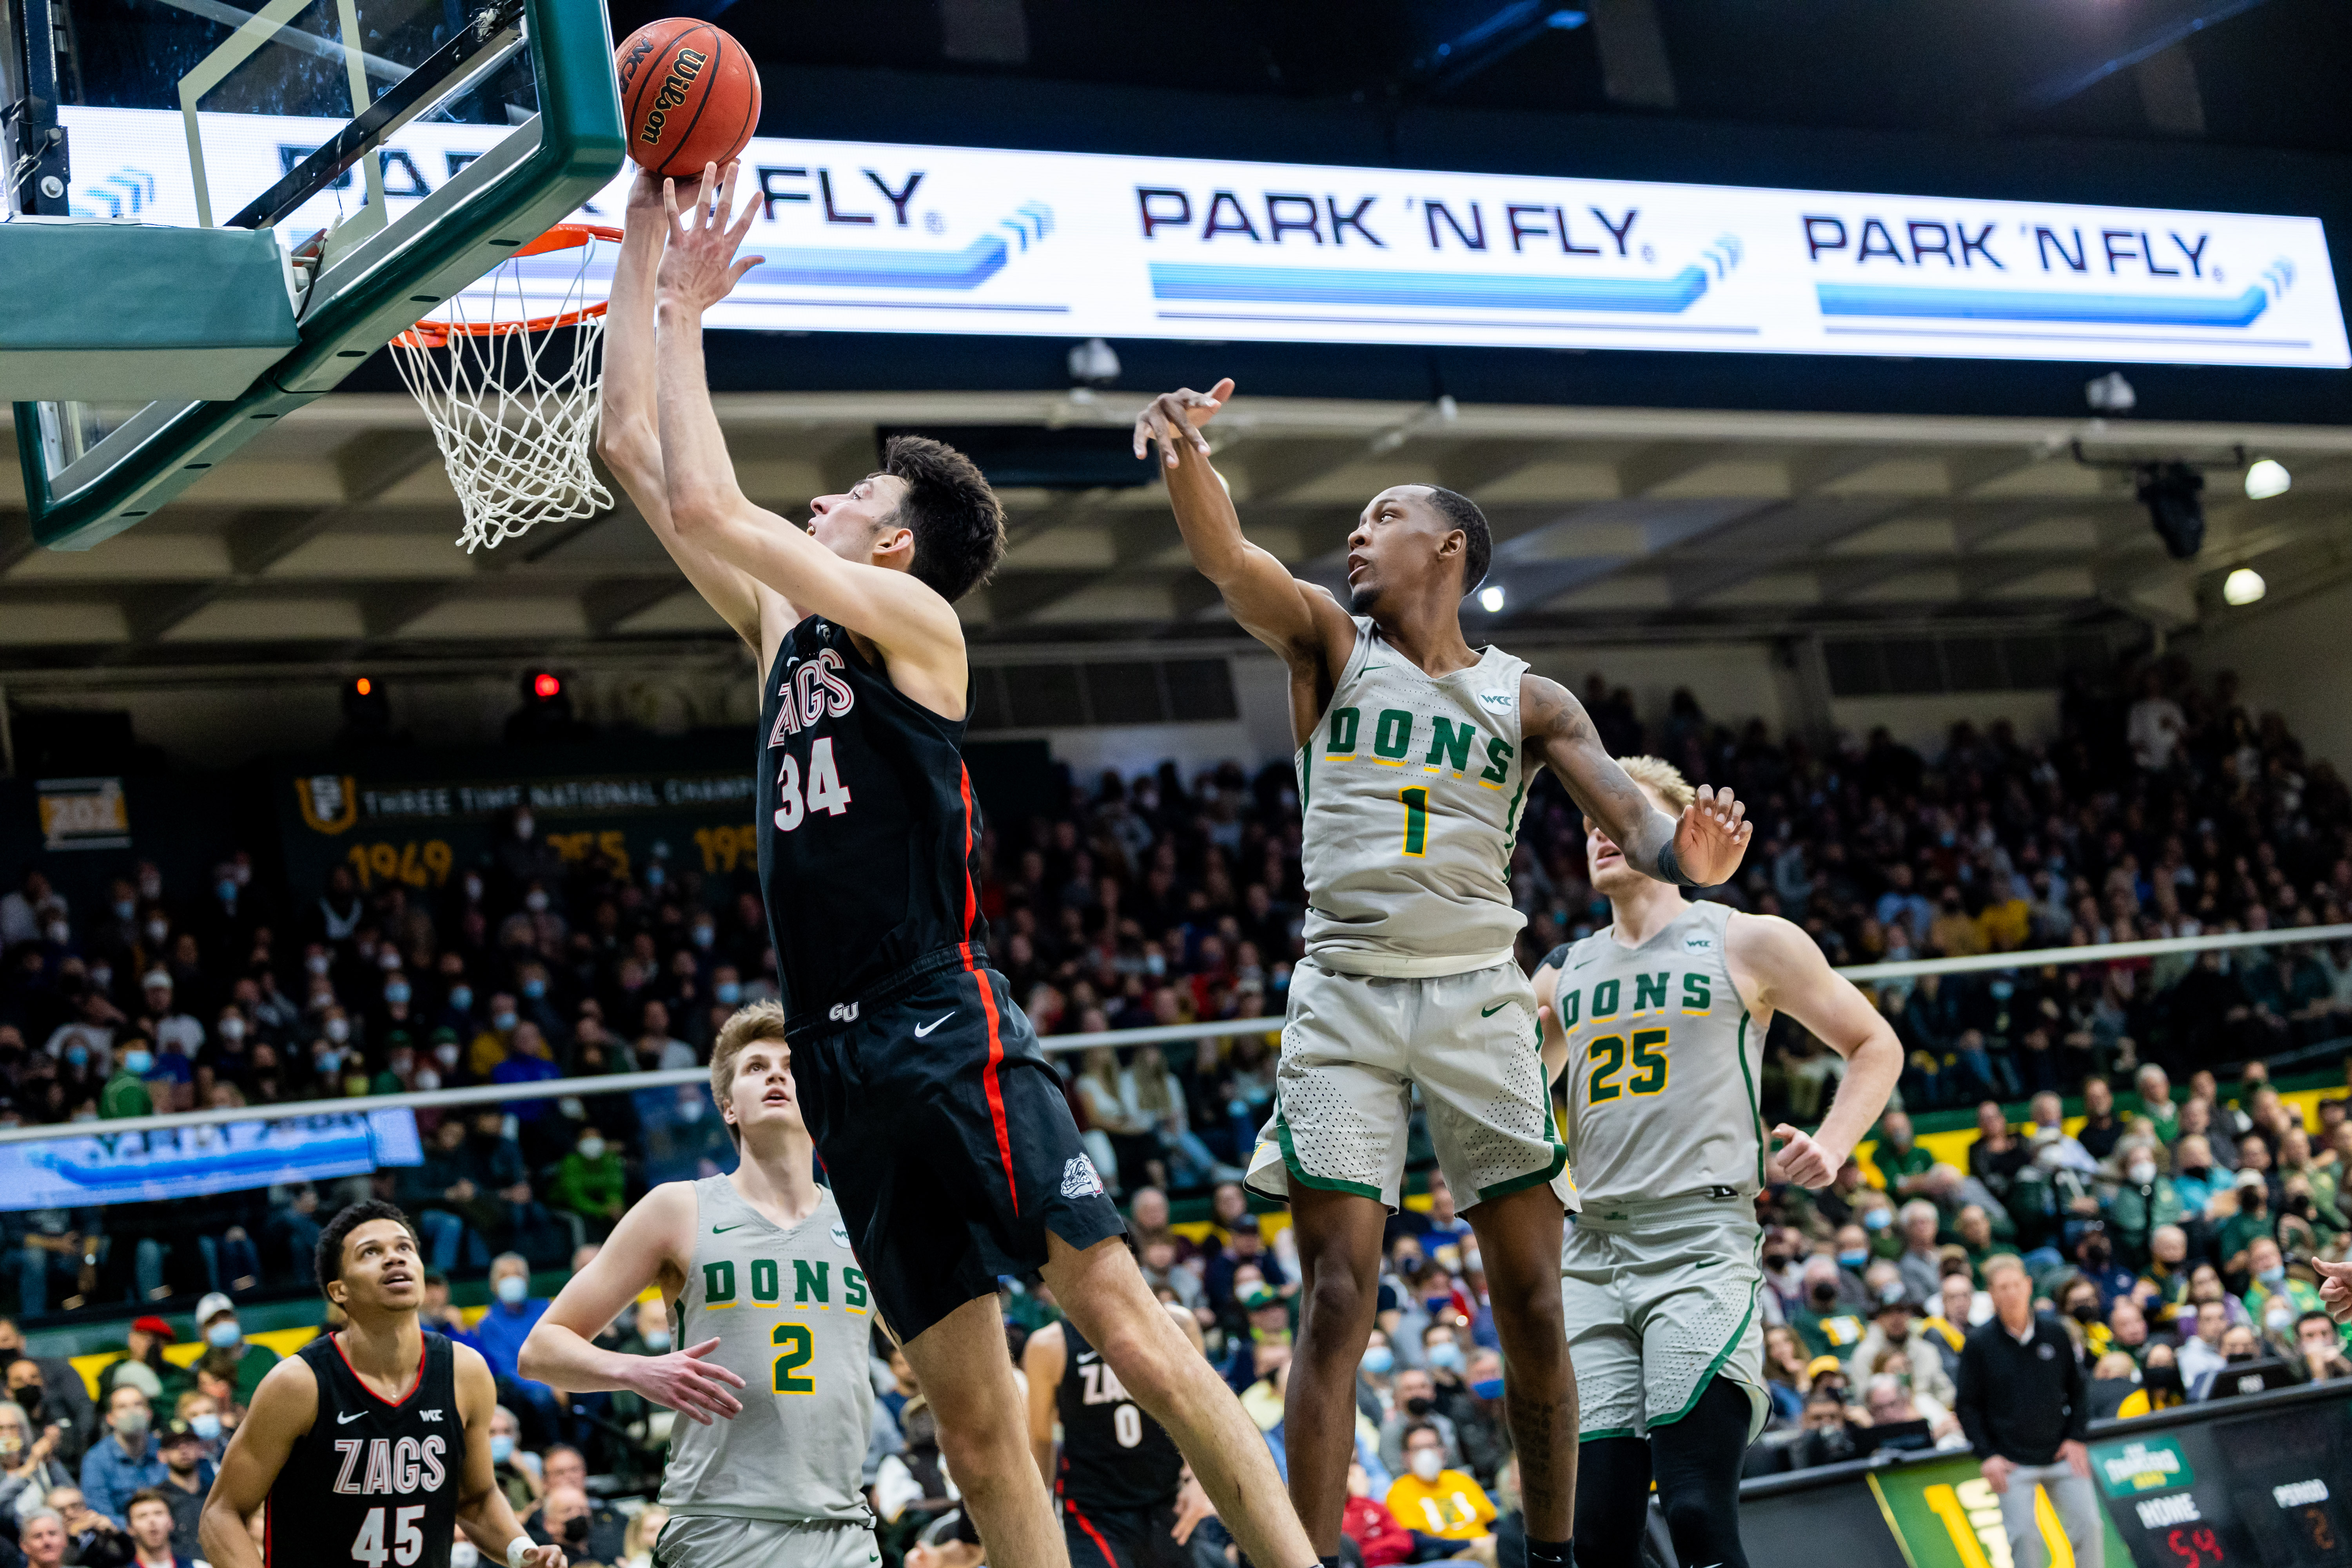 Gonzaga Bulldogs vs San Francisco Dons basketball free live stream, score, time, TV channel, how to watch WCC Tournament online (3/7/22)